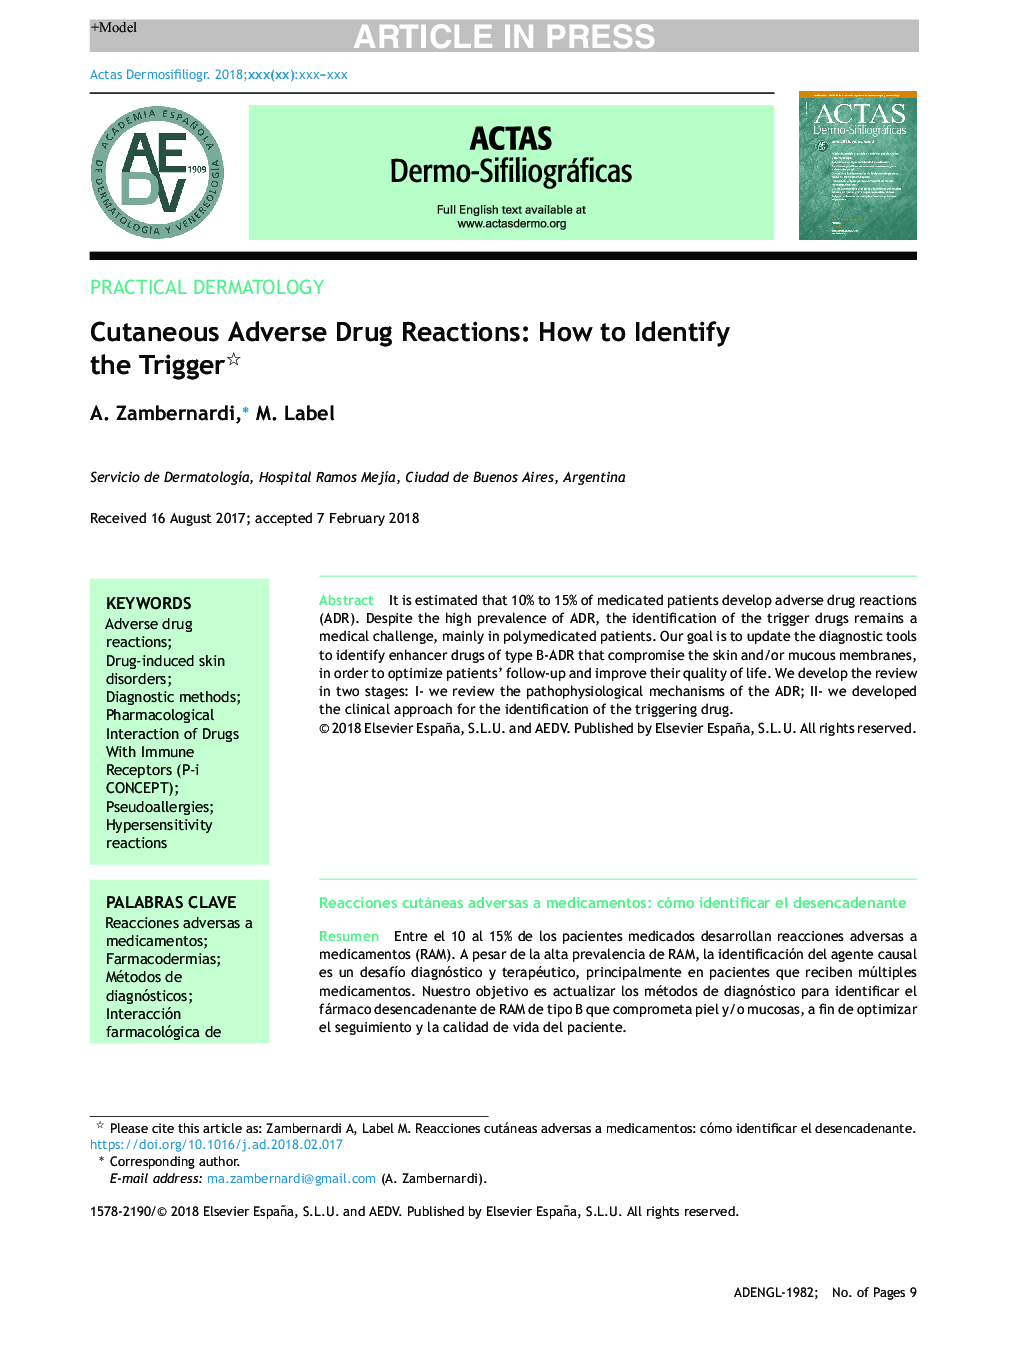 Cutaneous Adverse Drug Reactions: How to Identify the Trigger